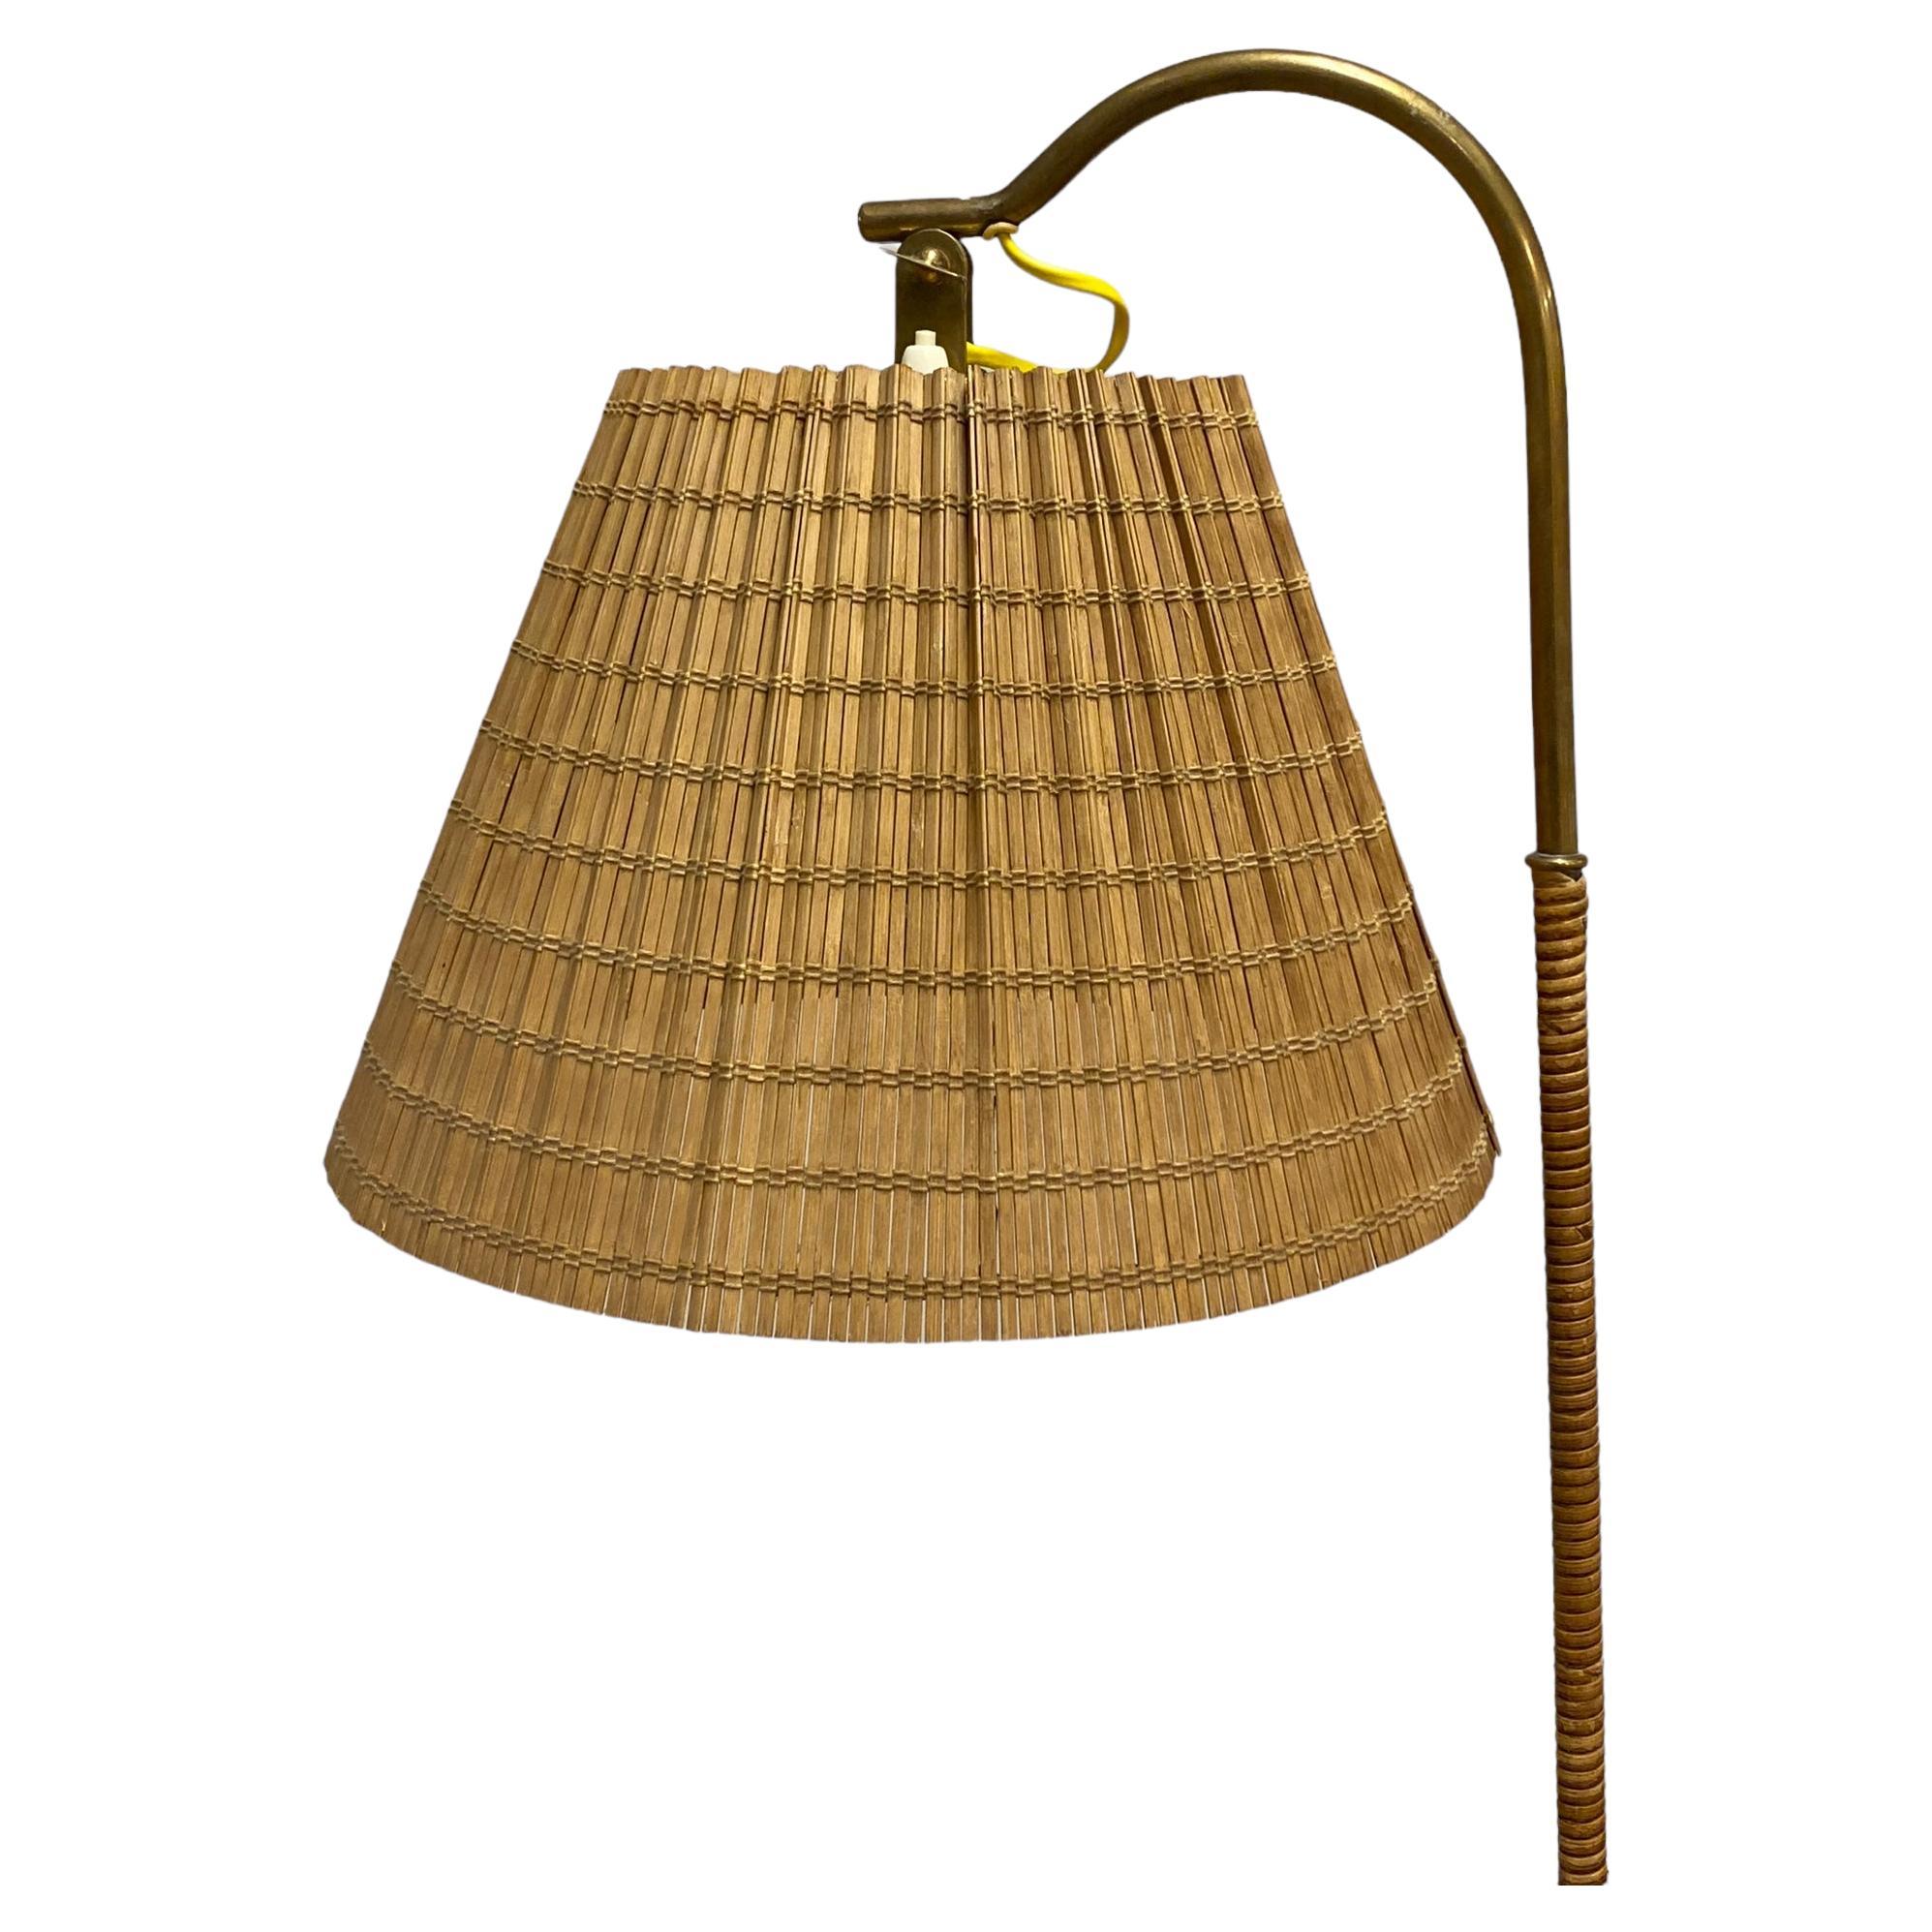 Lampadaire Paavo Tynell modèle. 9609, Taito Oy années 1950 en vente